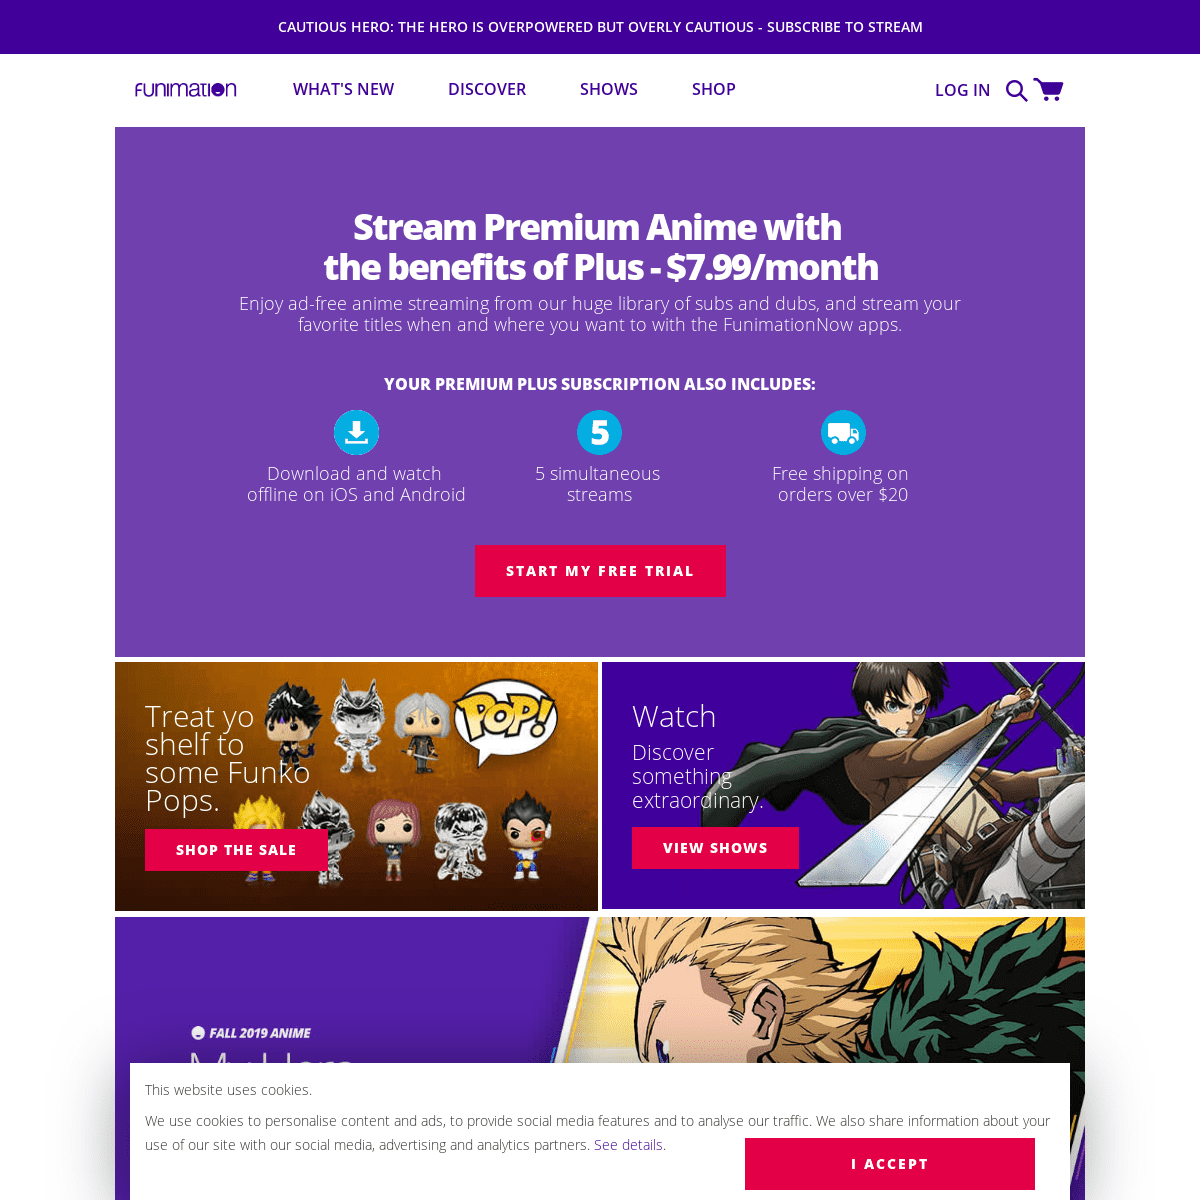 A complete backup of funimation.com